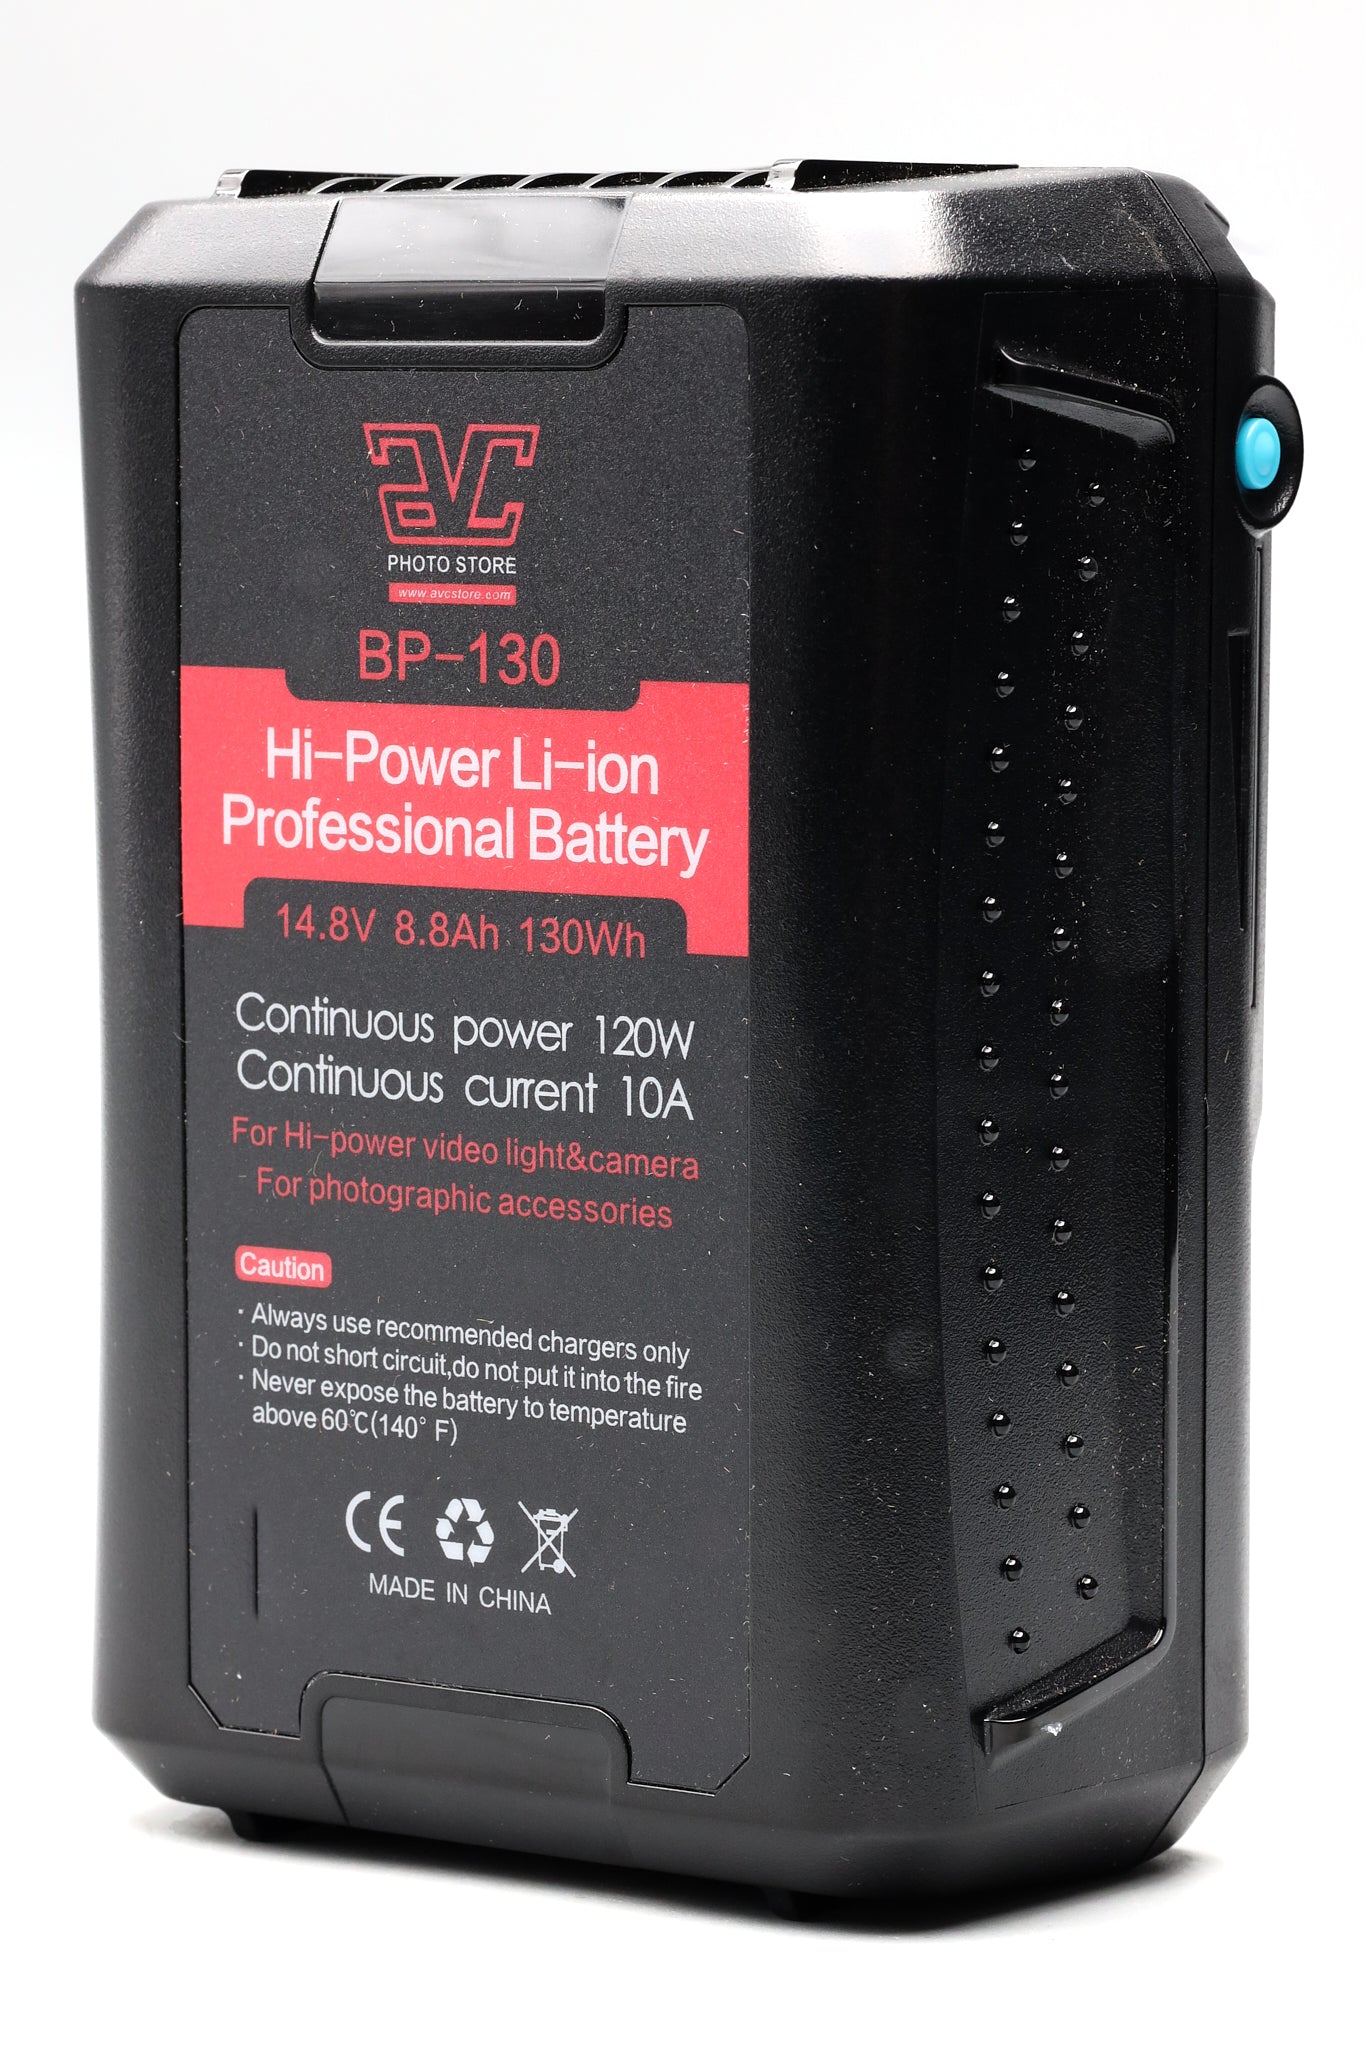 AVC BP130 Lithium Ion Professional Battery, 14.8V 8.8Ah 130Wh.